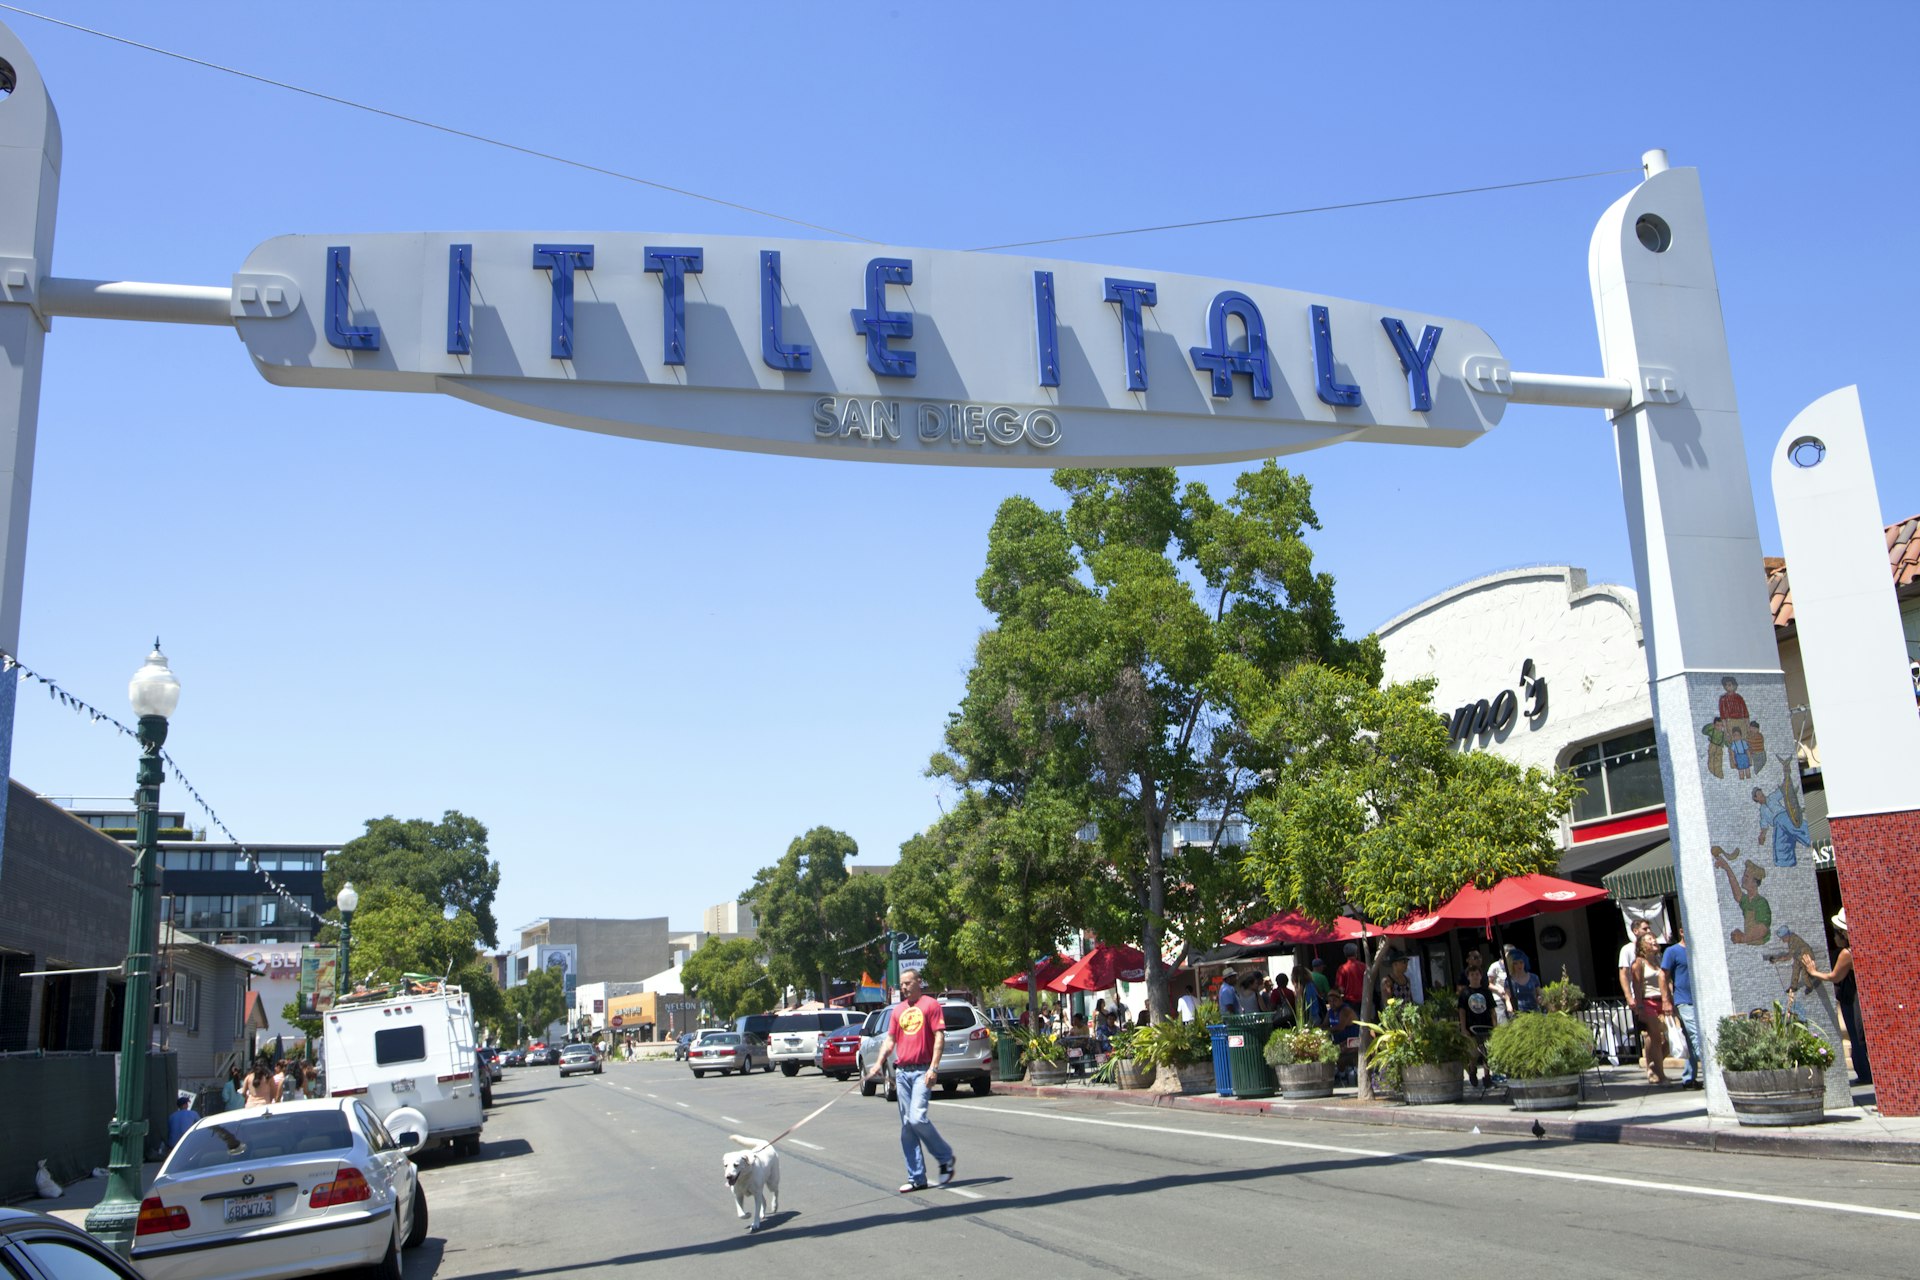 San Diego's Little Italy Sign and Street Scene